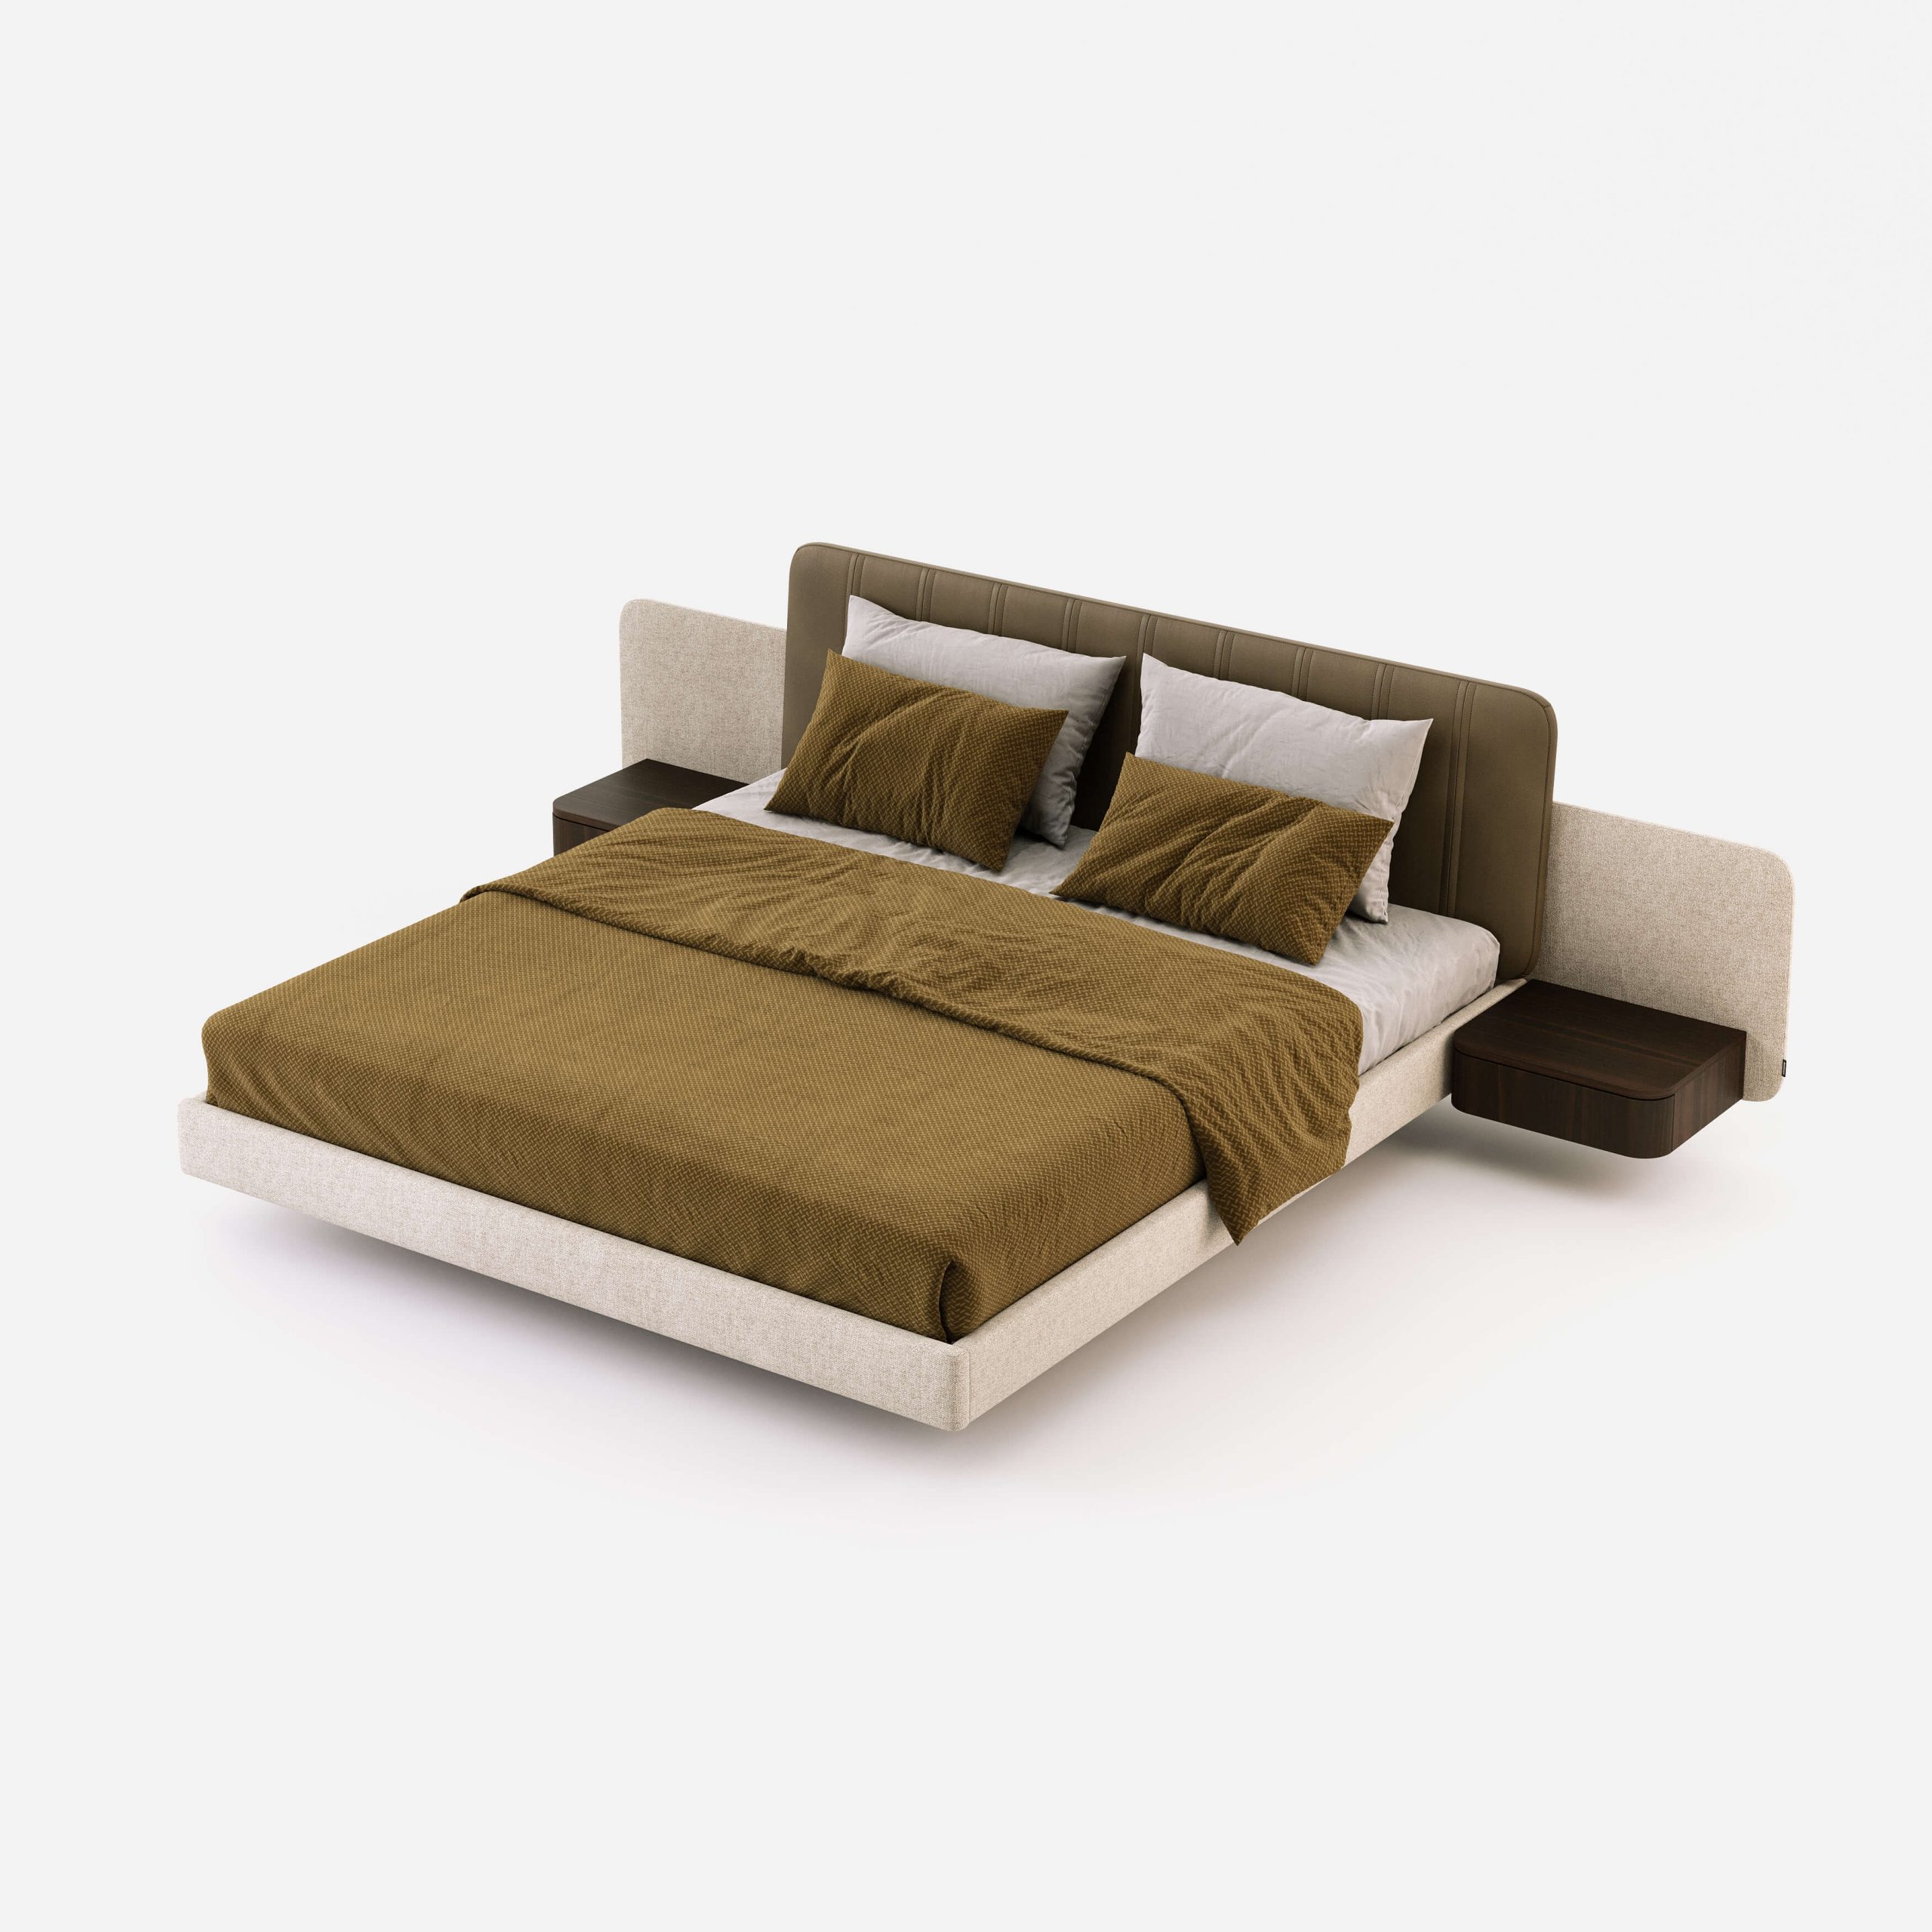 Amanda Bed Domkapa, You And Me Isola King Bed